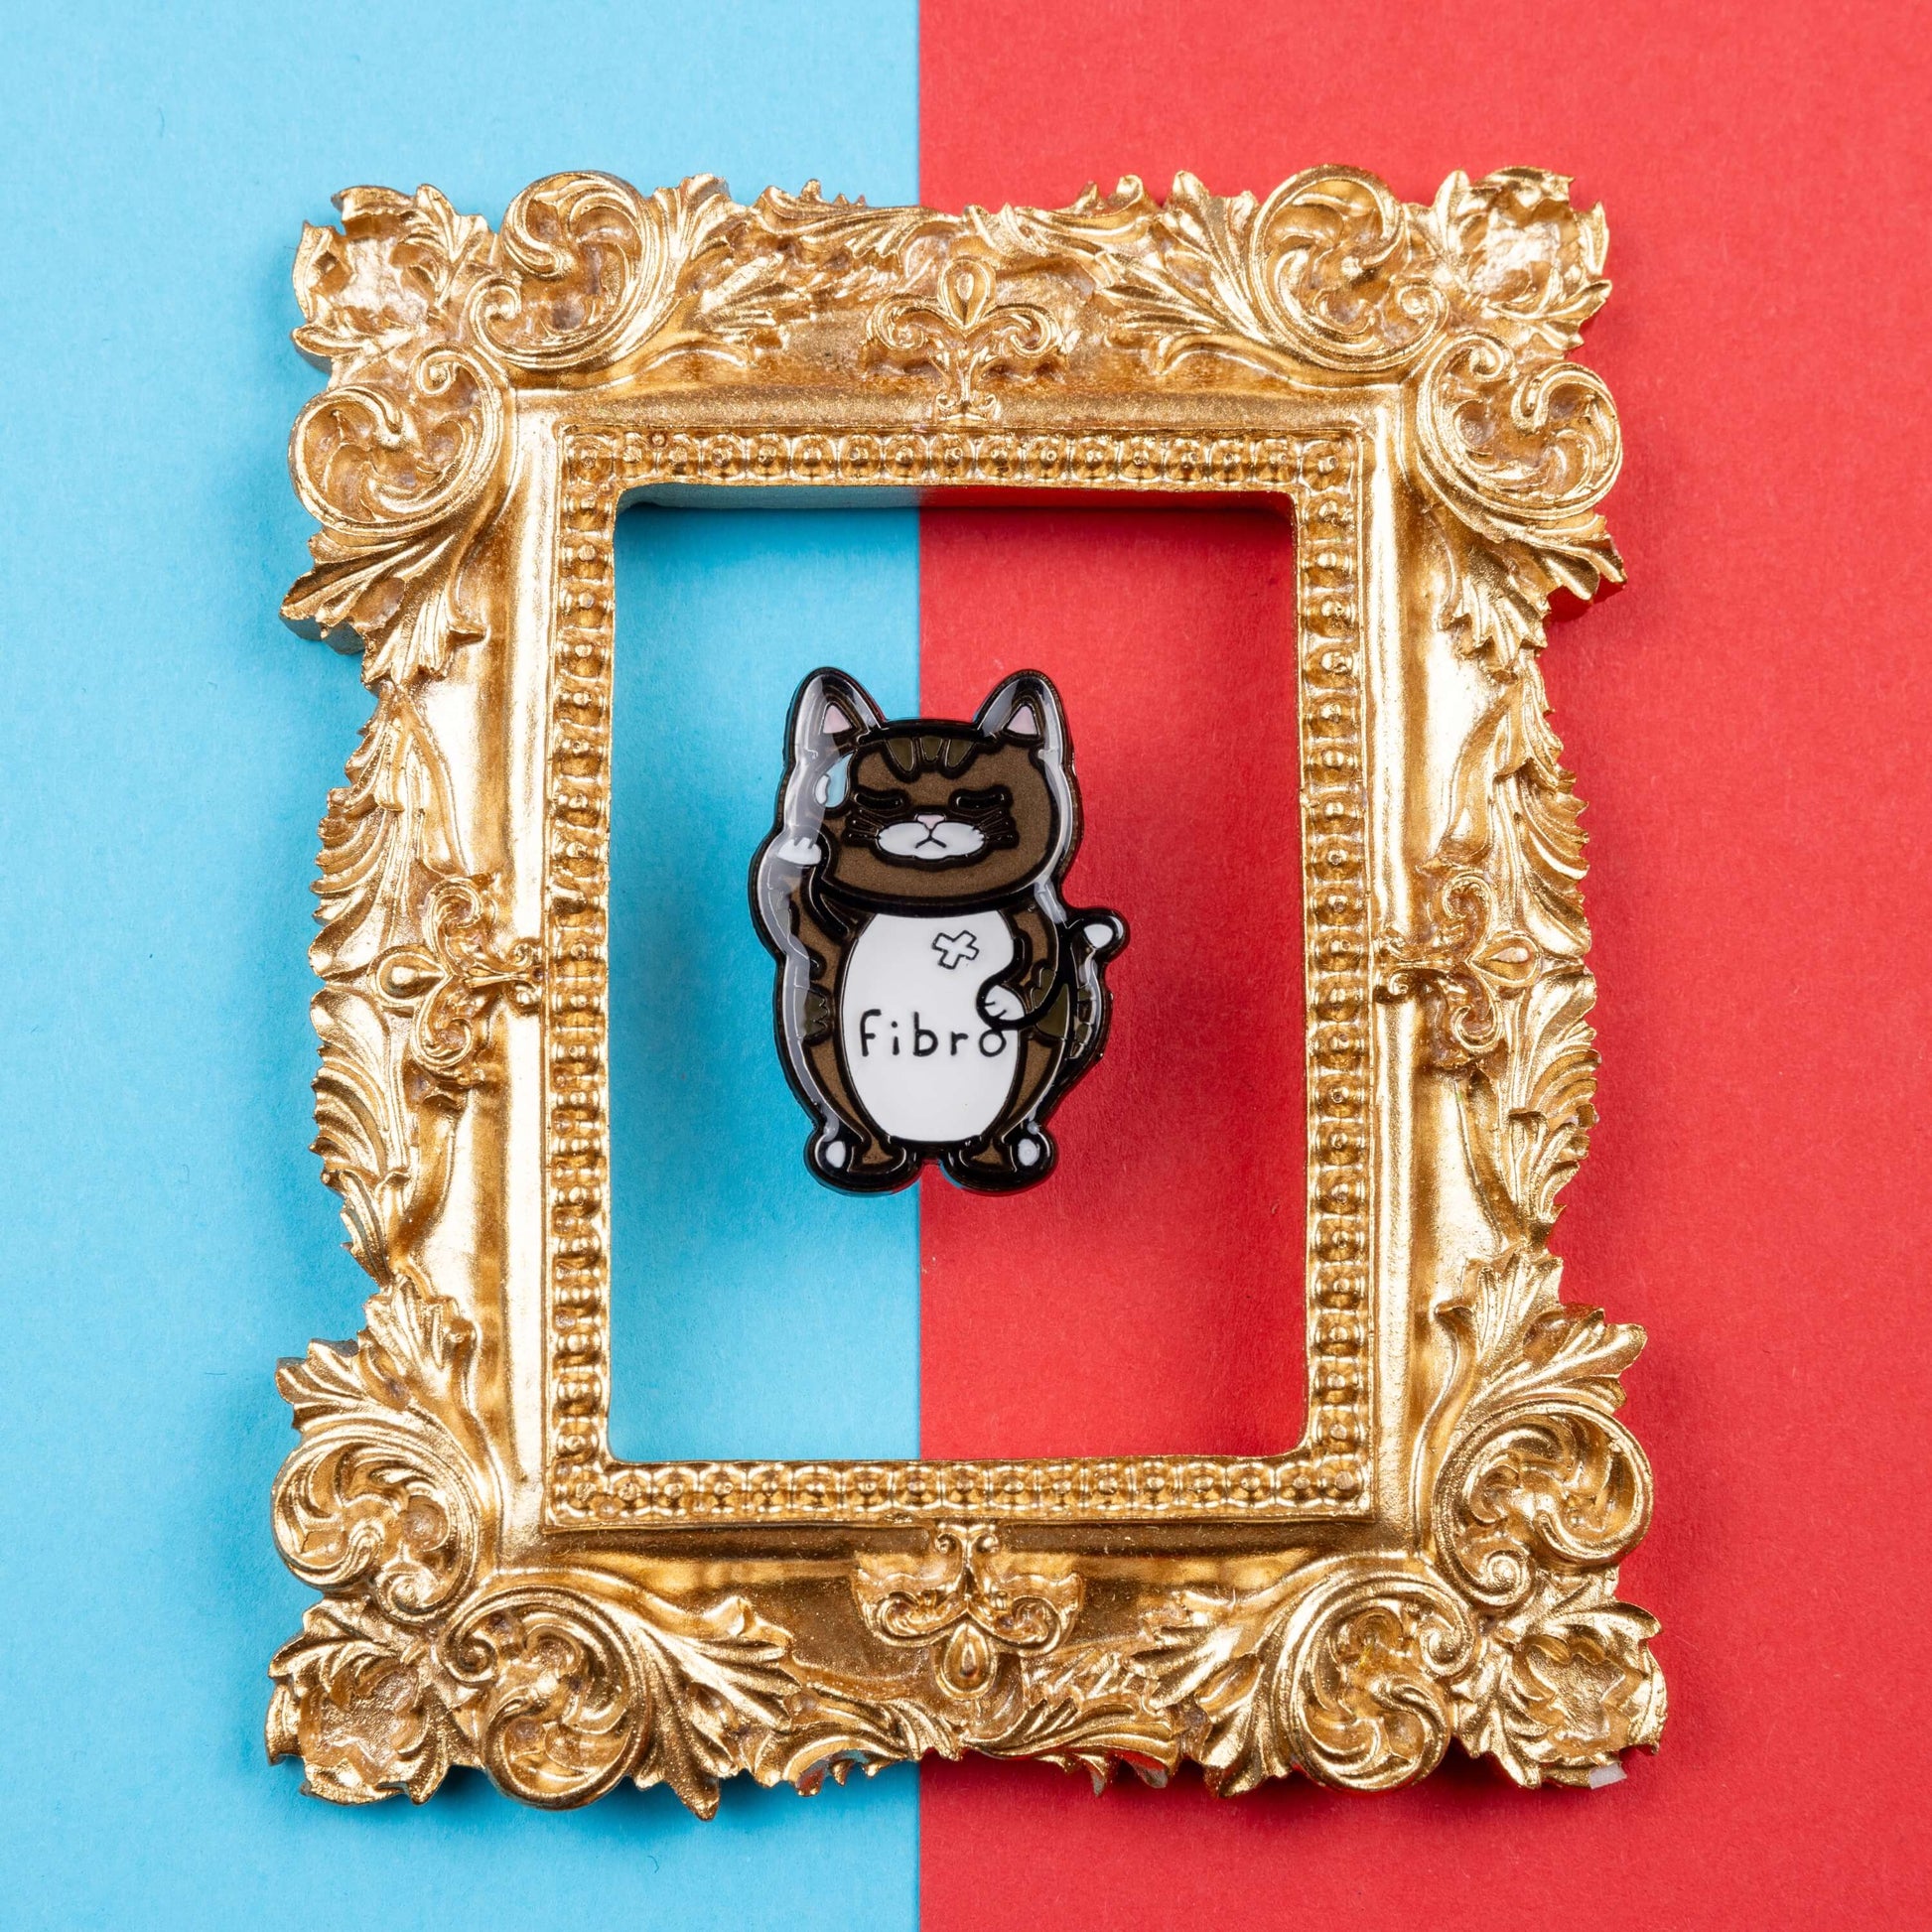 Fibromeowgia Enamel Pin - Fibromyalgia on a red and blue background inside a gold ornate frame. The enamel pin is a brown cat with a white stomach with fibro written across it. The cat has its eyes closed, a sweat droplet on its forehead and holding its head in its paw. The enamel pin is designed to raise awareness for fibromyalgia.